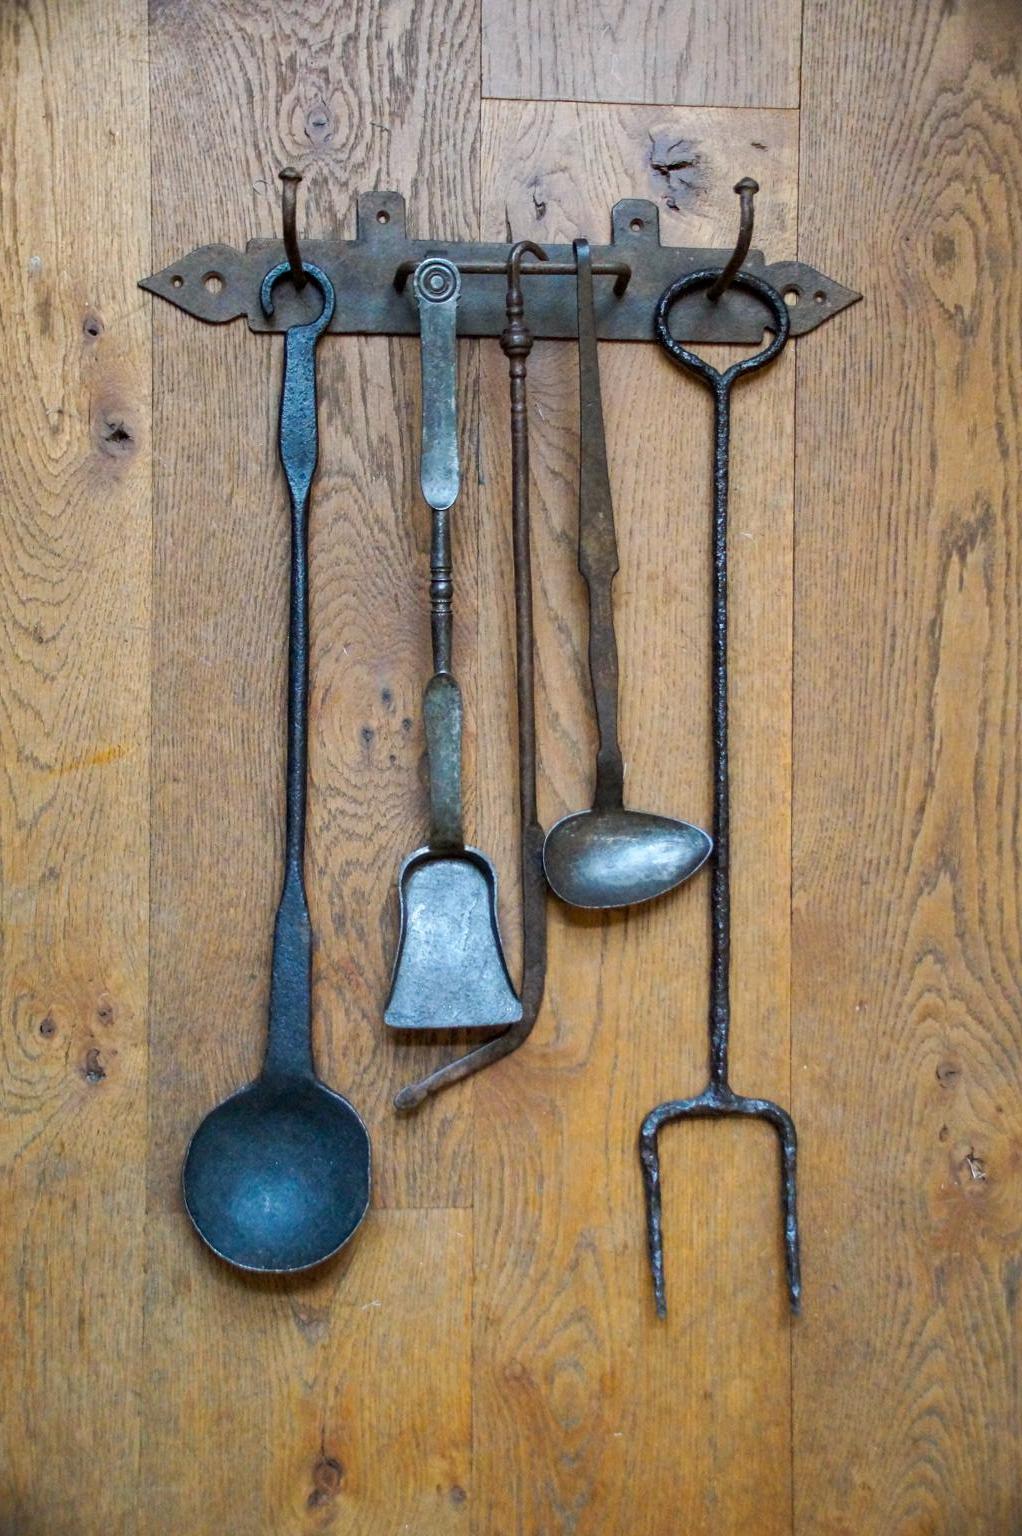 18th-19th century Dutch Louis XV fireplace tool set consisting of a hanger and five fire irons and kitchen tools. From left to right is included a wrought iron spoon, a wrought iron small shovel, a wrought iron poker, a wrought spoon, and a wrought